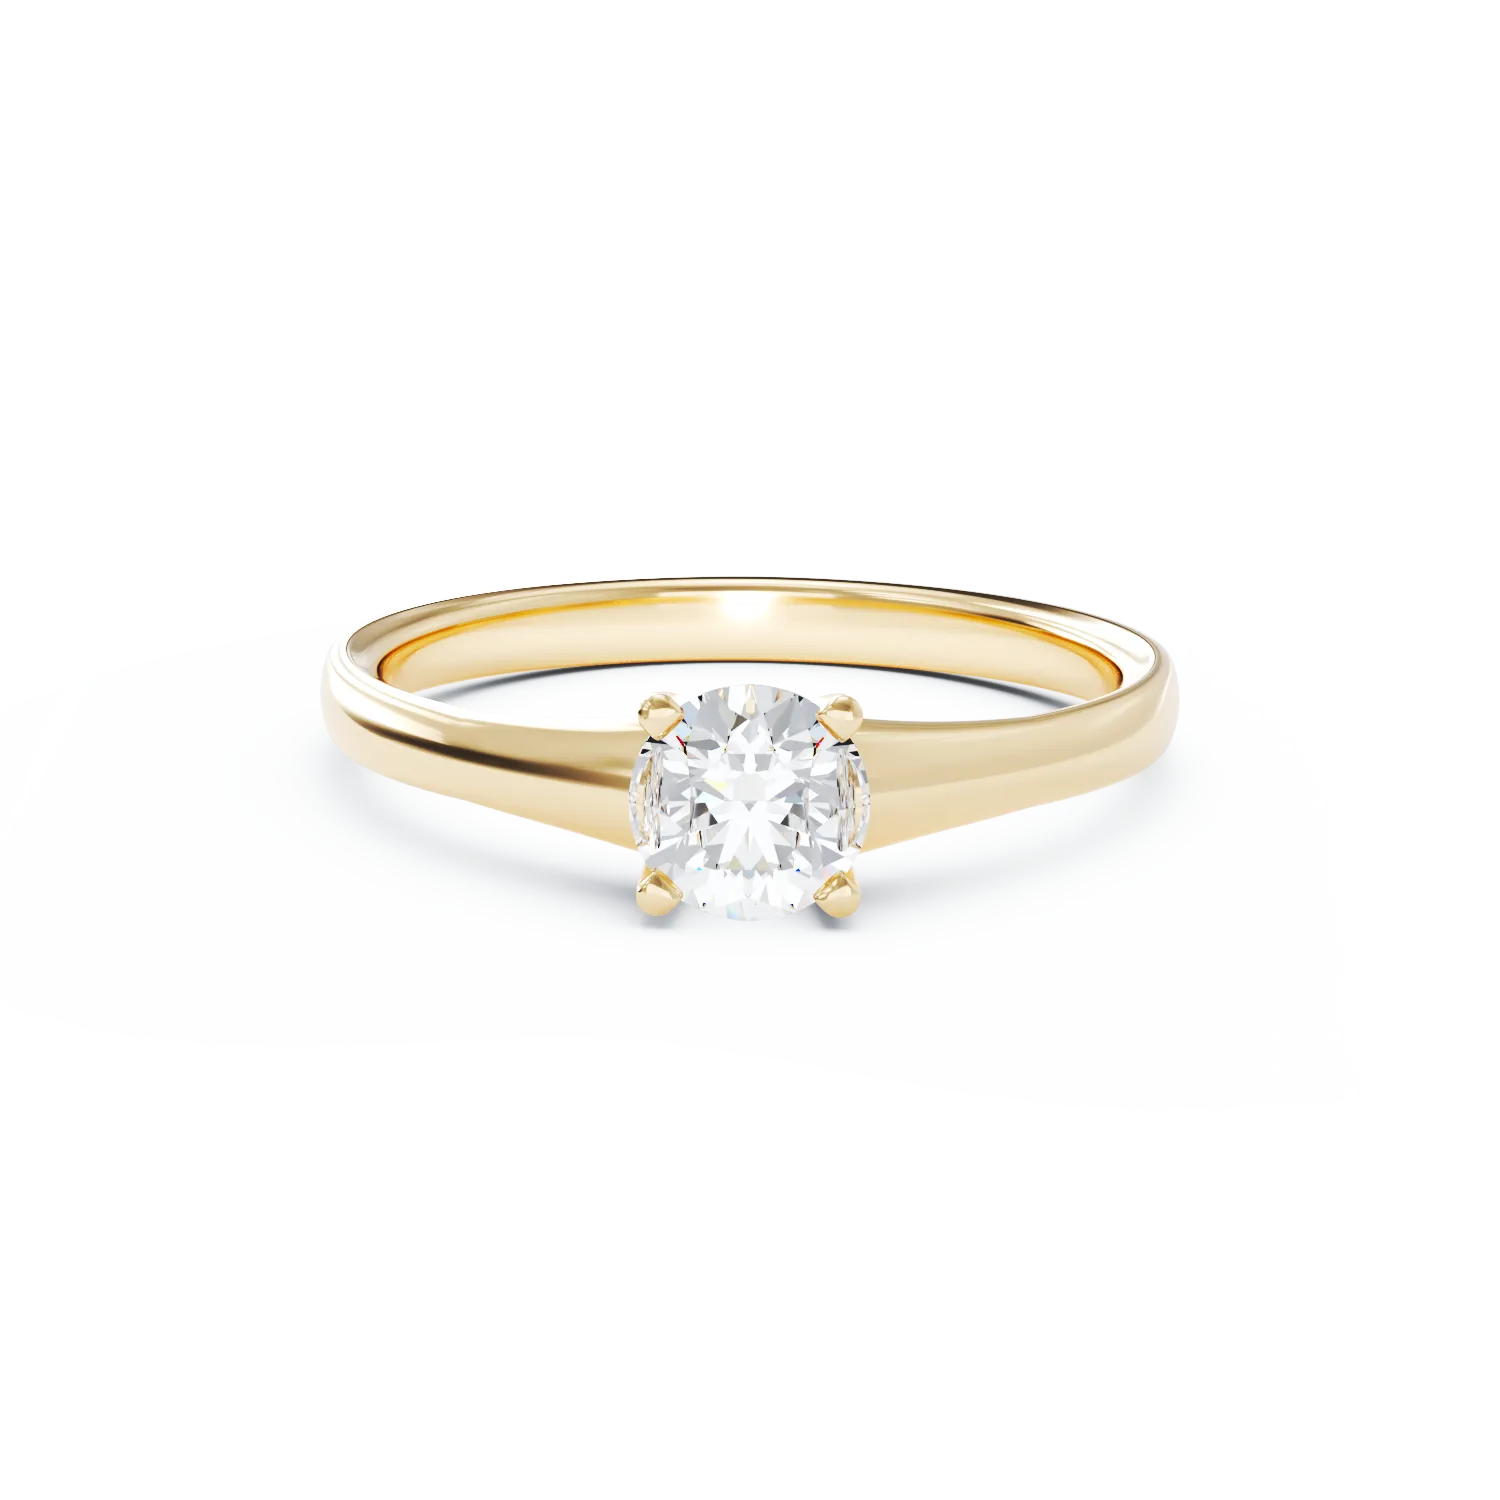 18K yellow gold engagement ring with a 0.5ct solitaire diamond